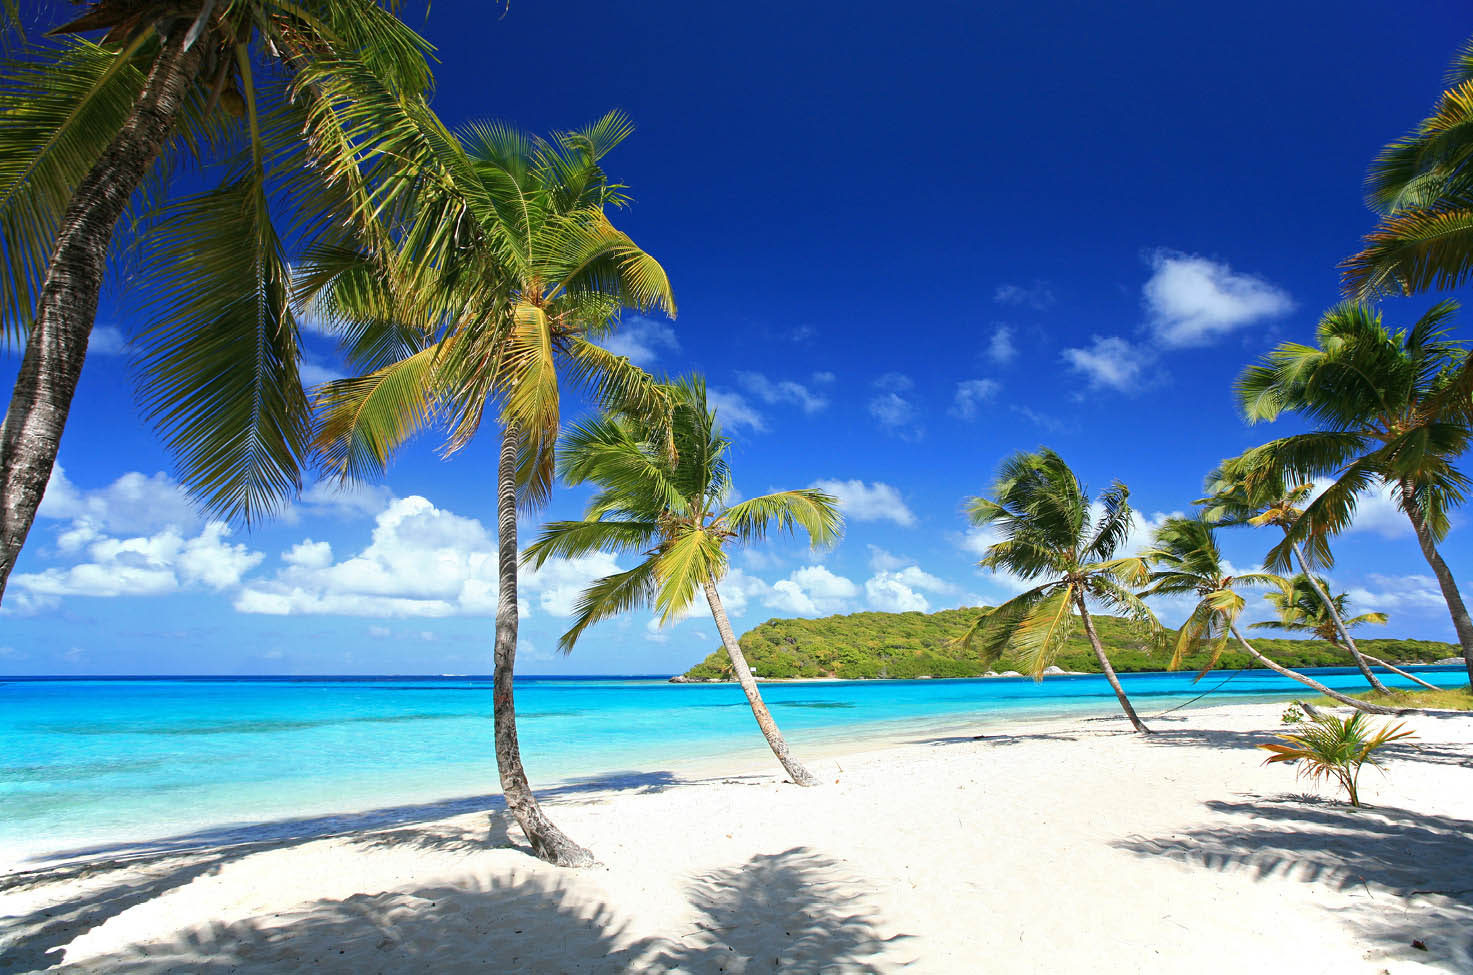 Palm trees on a white-sand beach under a deep blue sky near turquoise waters